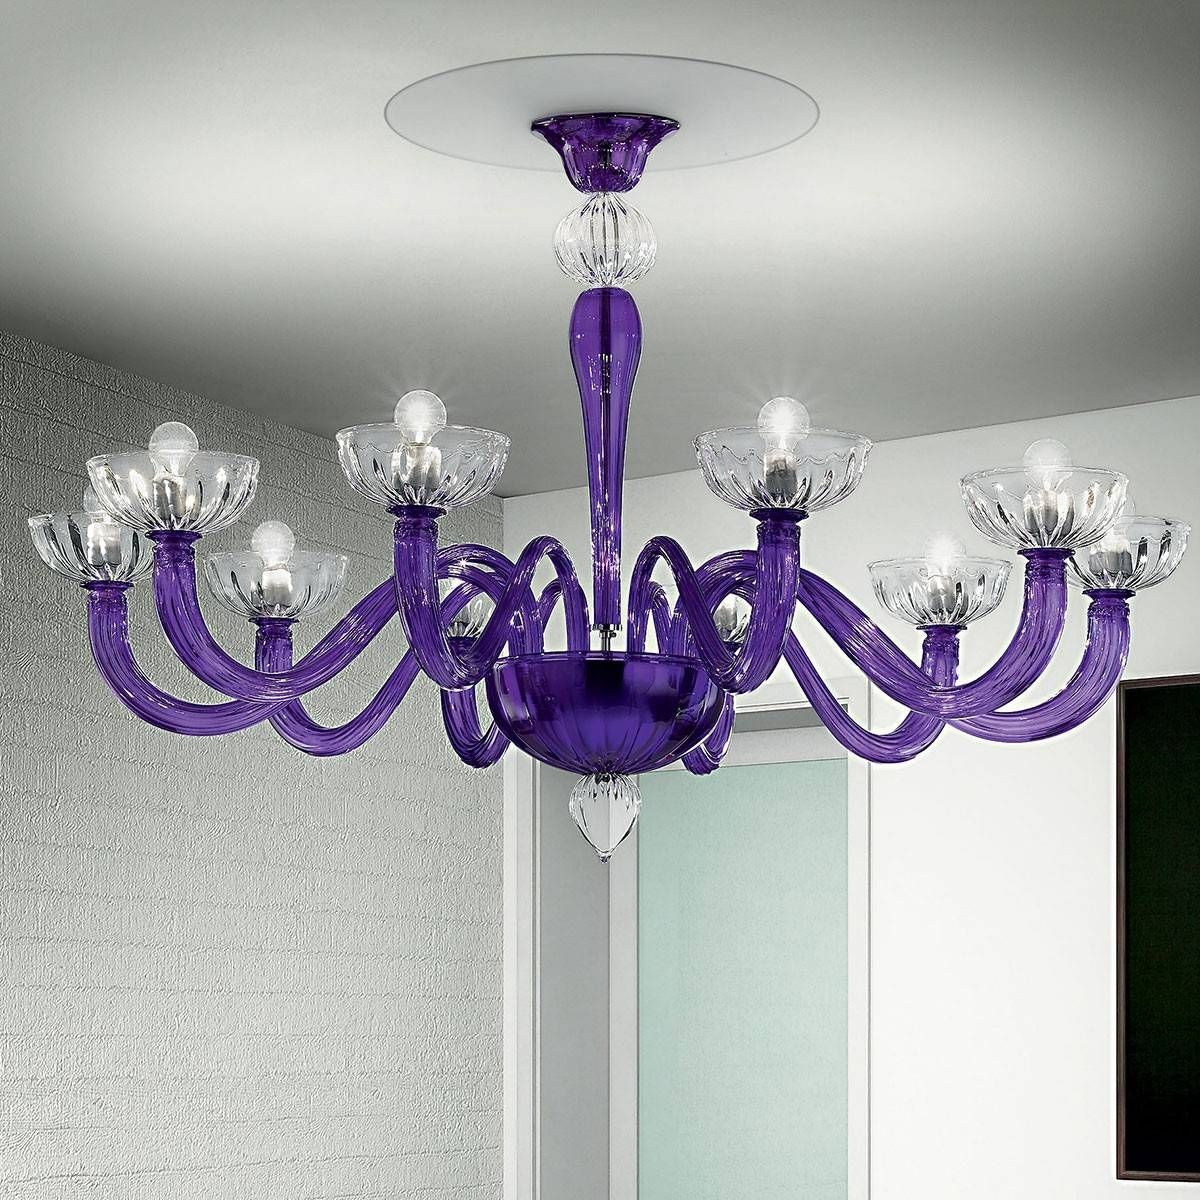 Murano Ceiling Light – Murano Glass Ceiling Light Fixtures Throughout Murano Lights Fixtures (View 1 of 15)